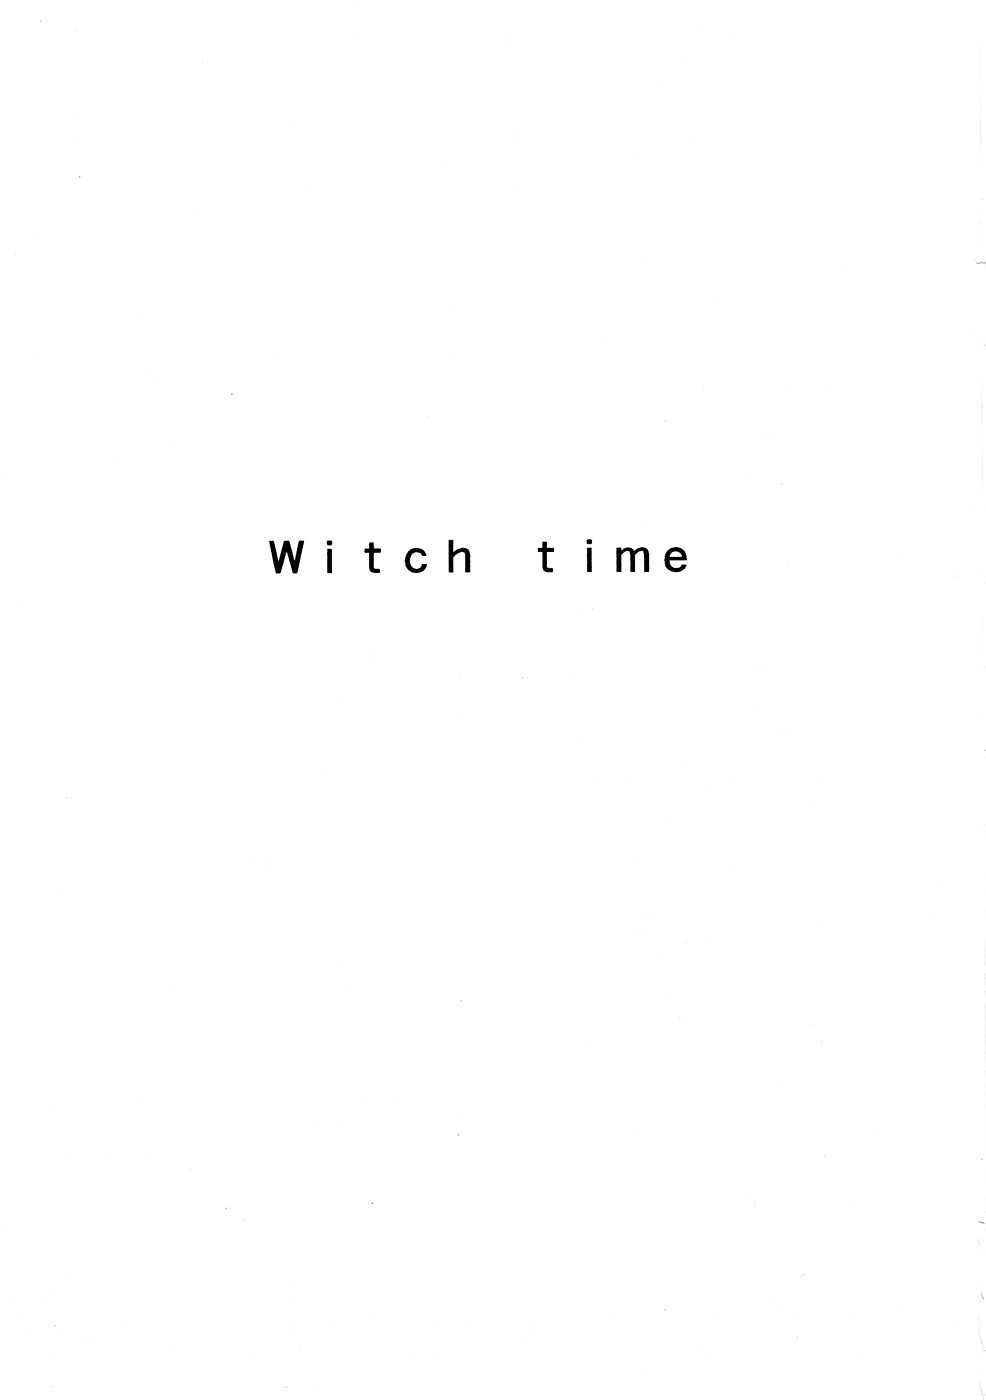 (C79) [Chrono Mail (Tokie Hirohito)] Witch Time (Bayonetta) (korean) (C79) [クロノ・メール (刻江尋人)] Witch Time (ベヨネッタ) [韓国翻訳]